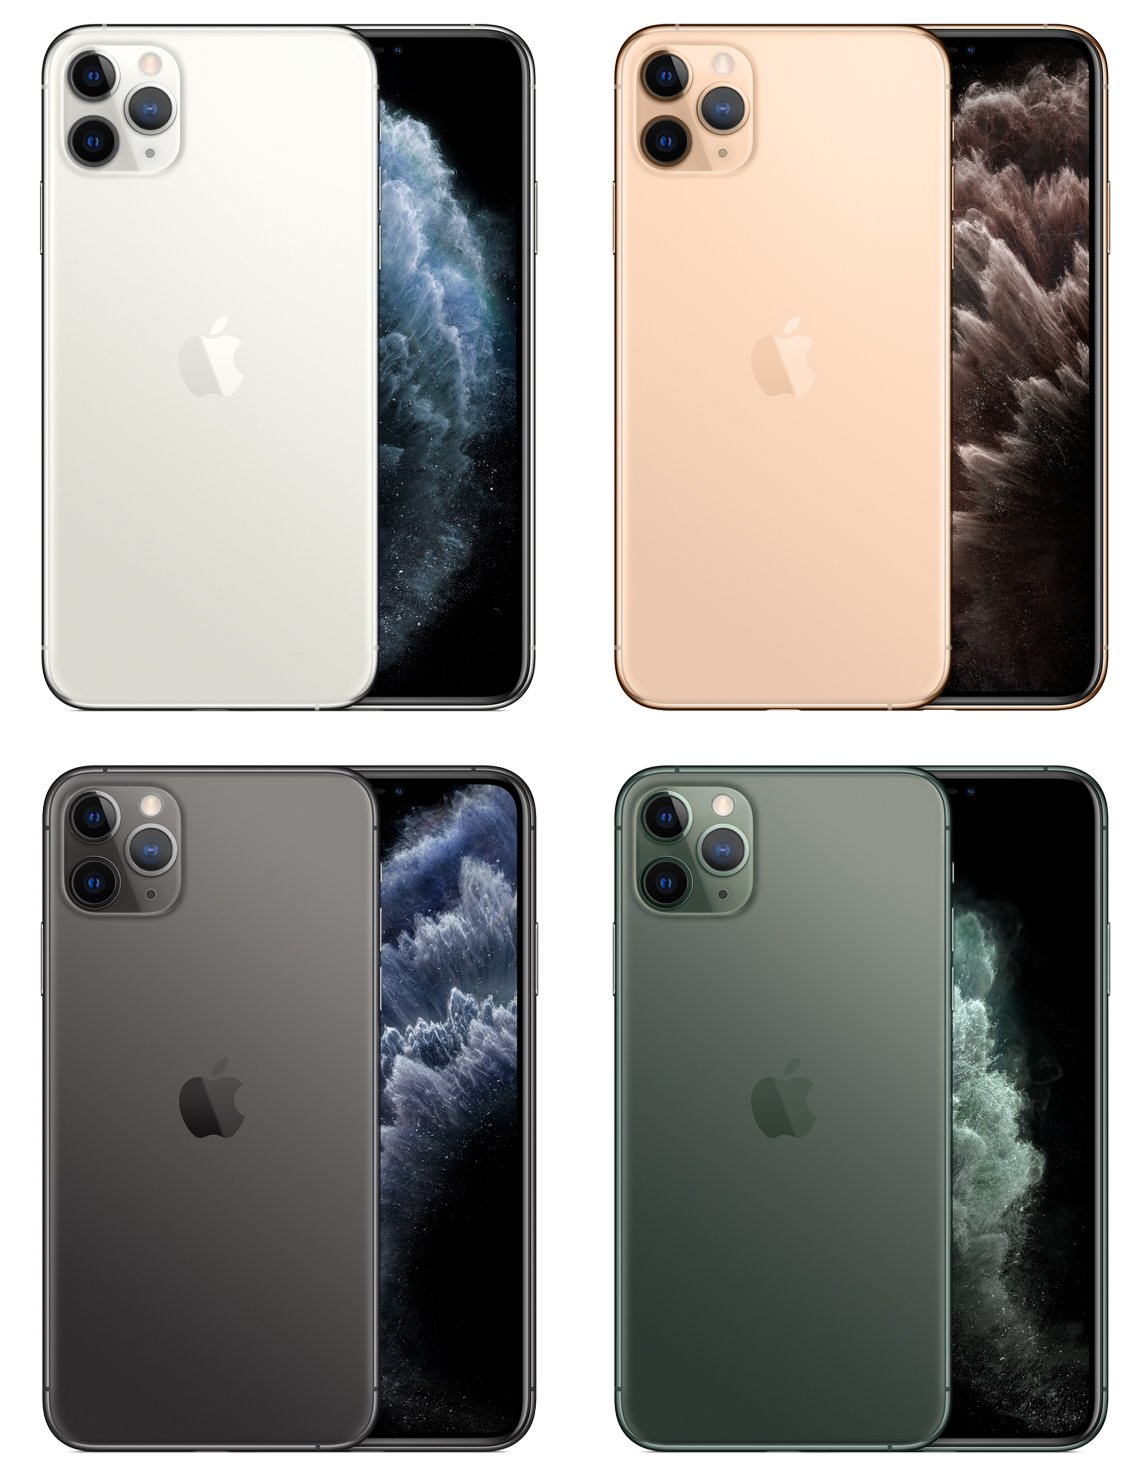 Apple iPhone 11 Pro Max specs, review, release date - PhonesData